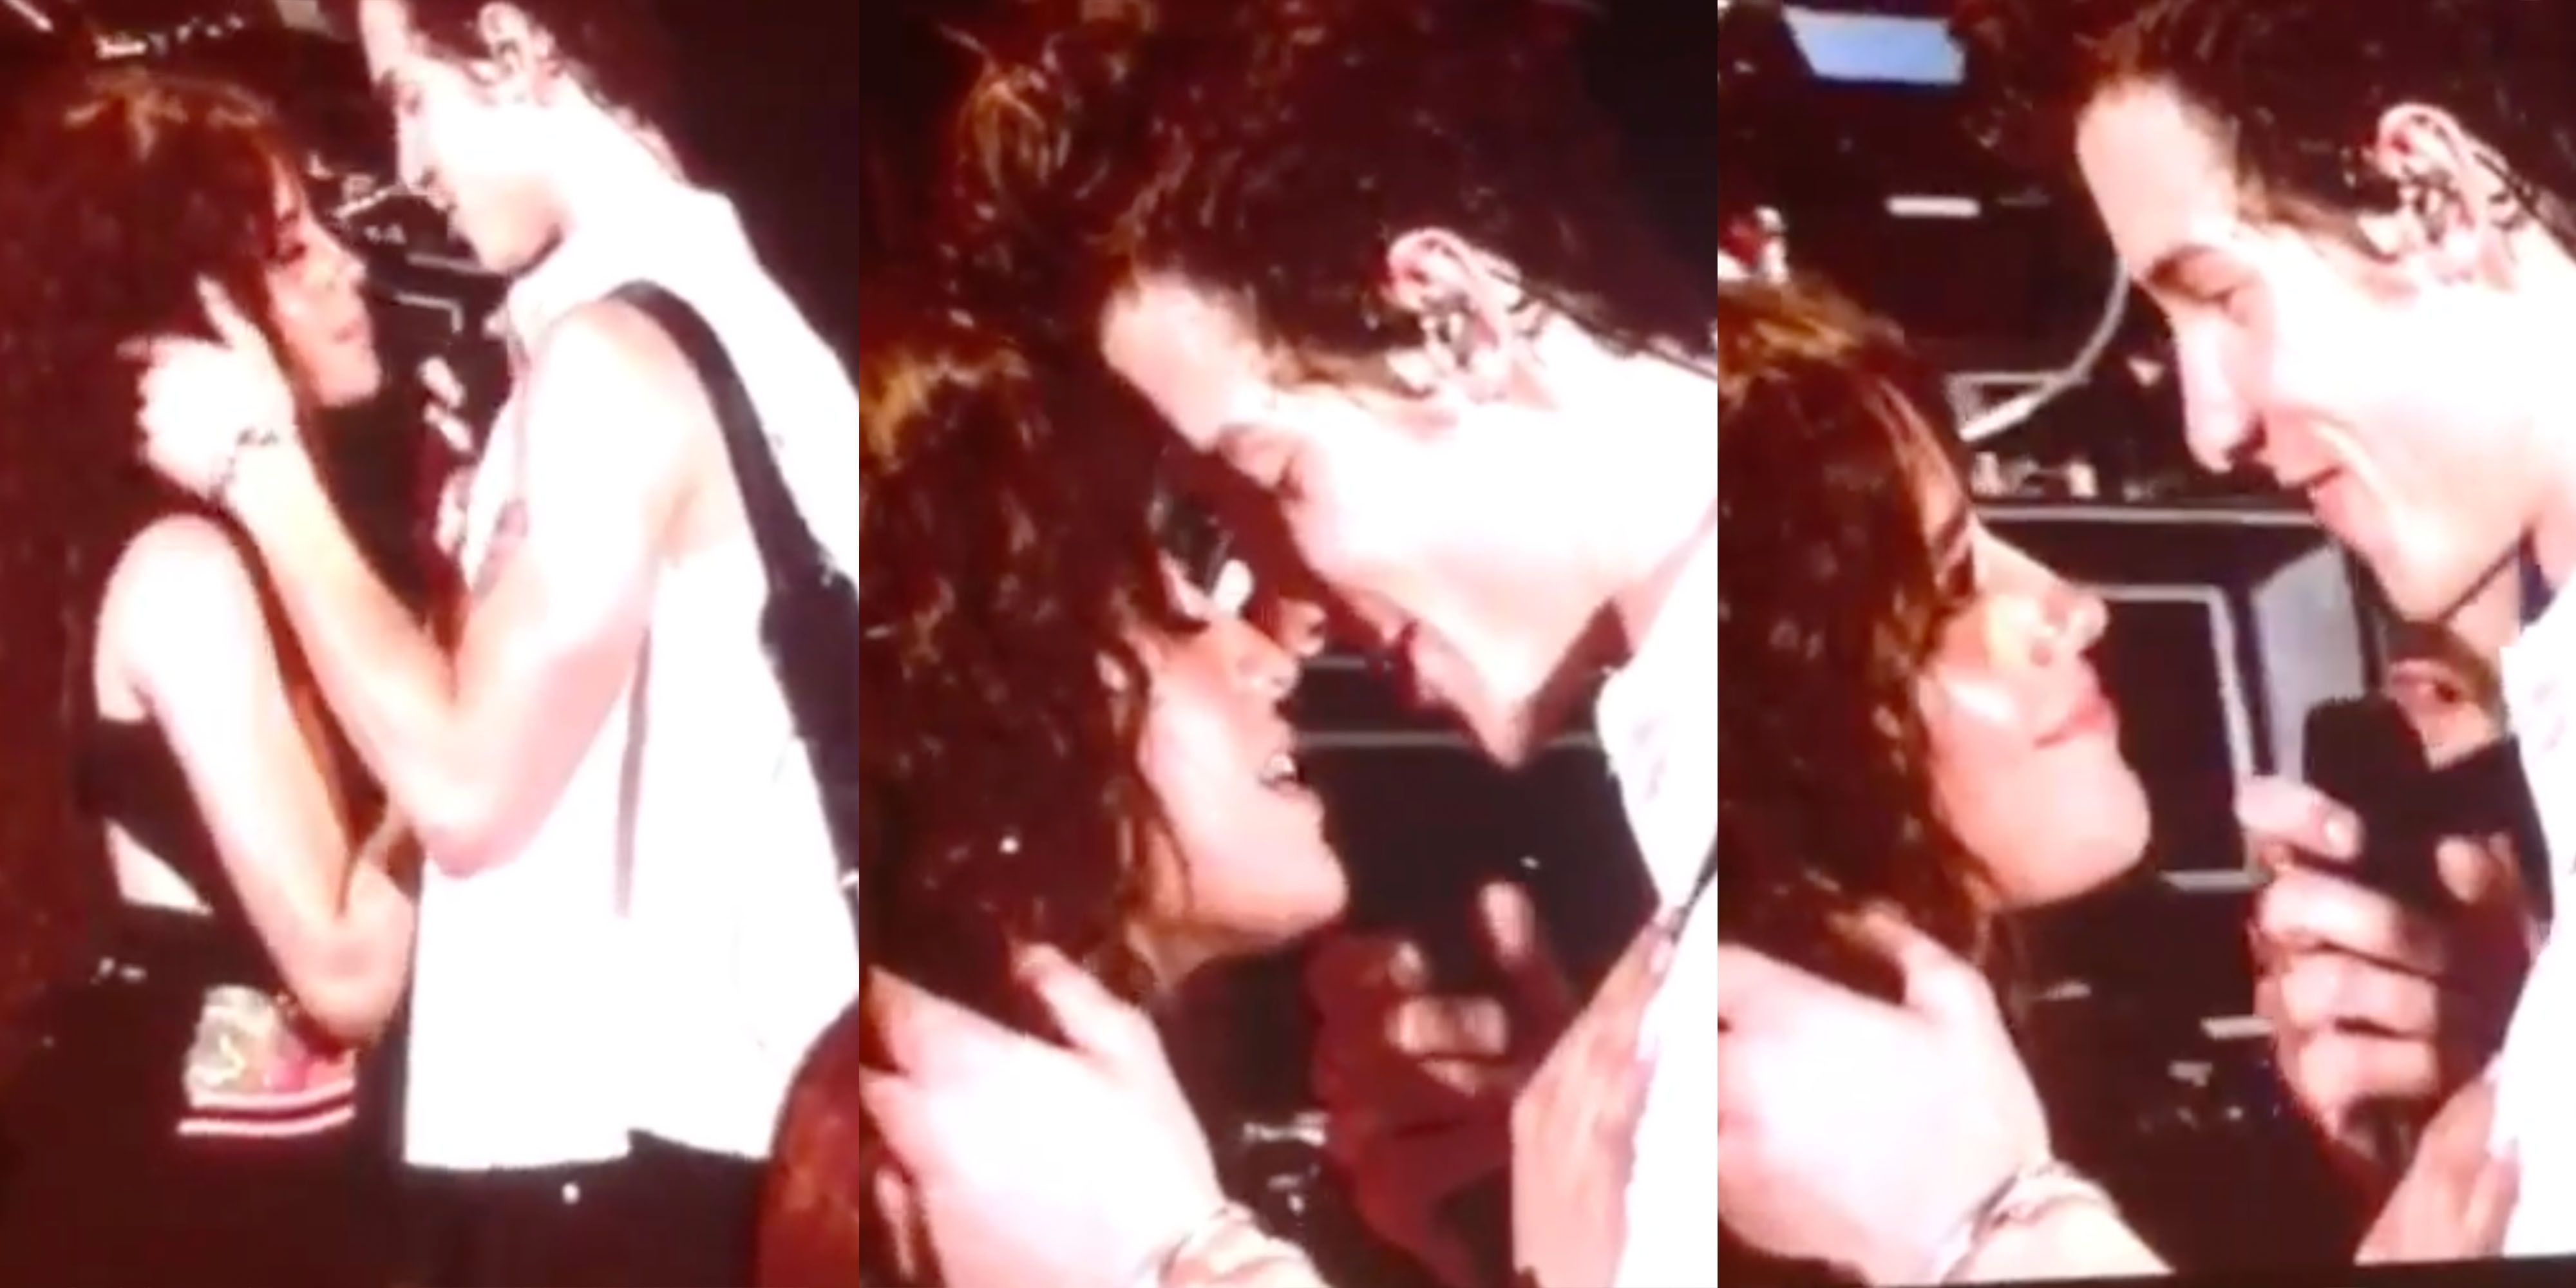 Camila Cabello And Shawn Mendes Look In Love During Surprise Duet